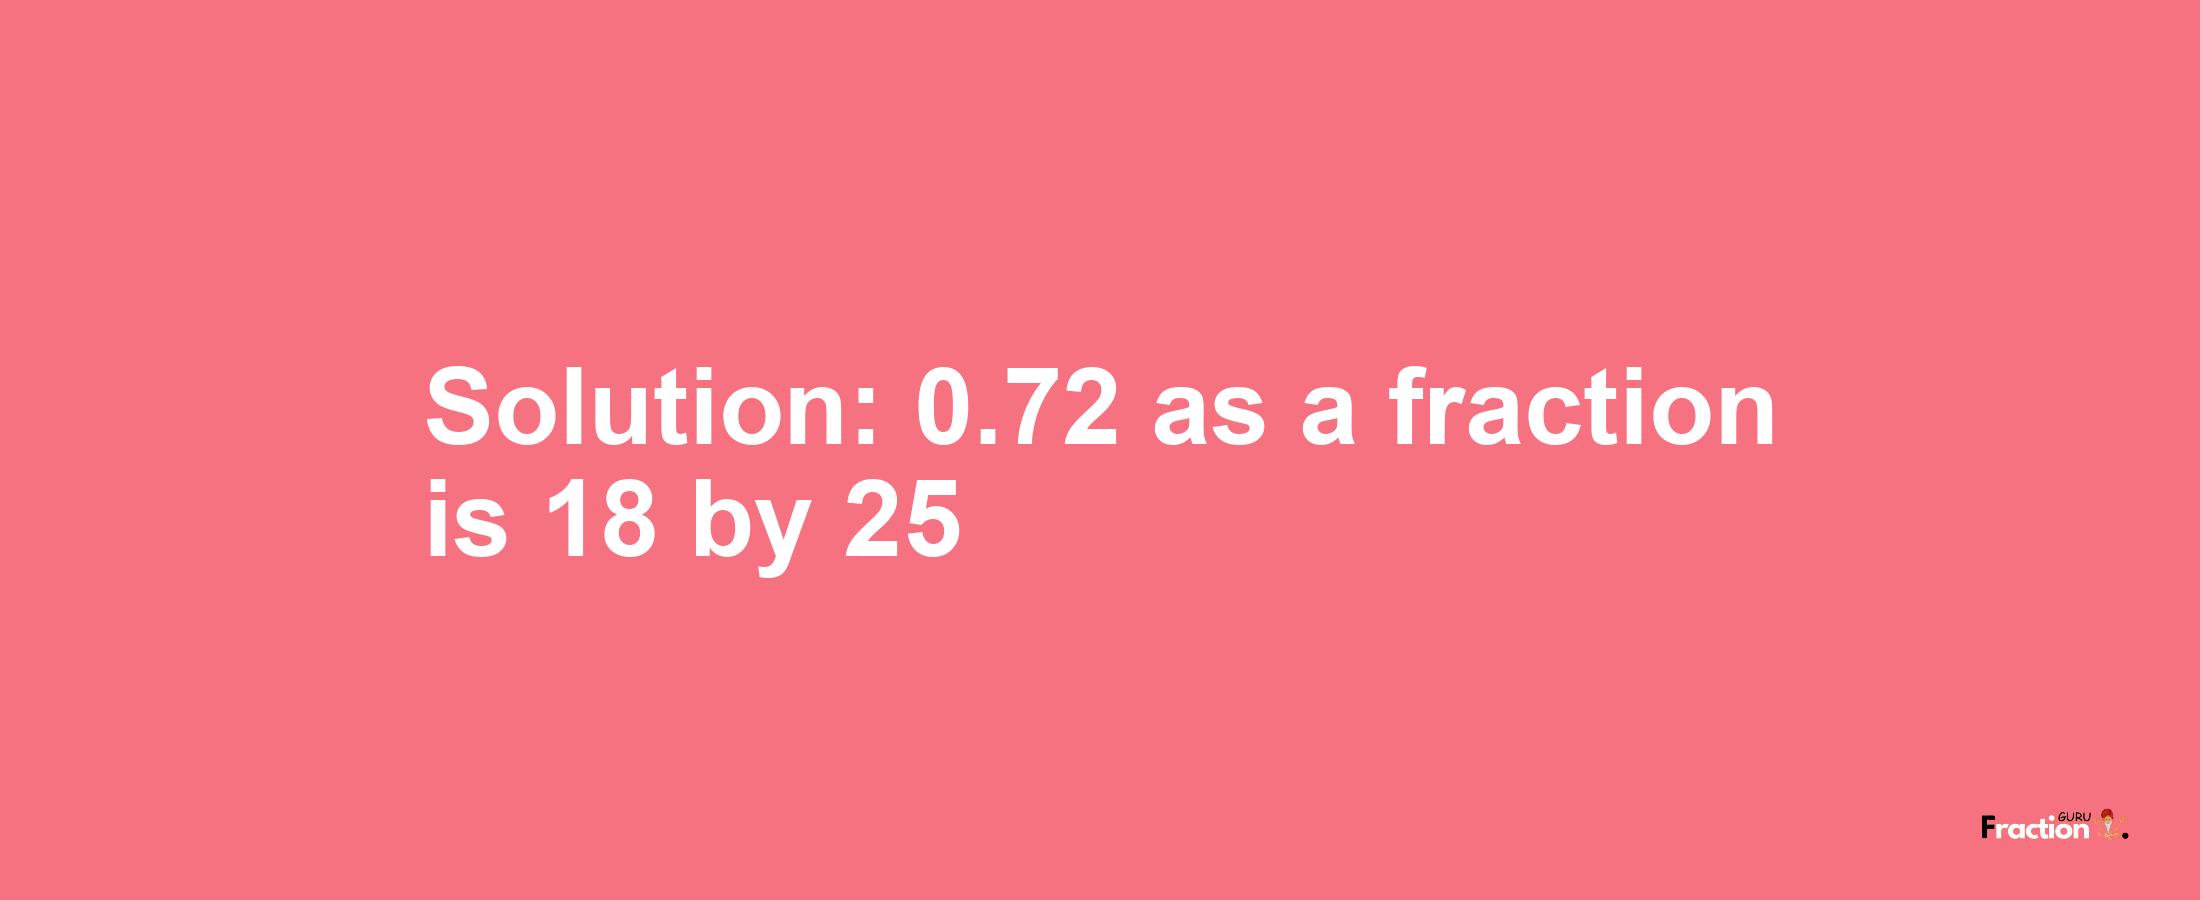 Solution:0.72 as a fraction is 18/25